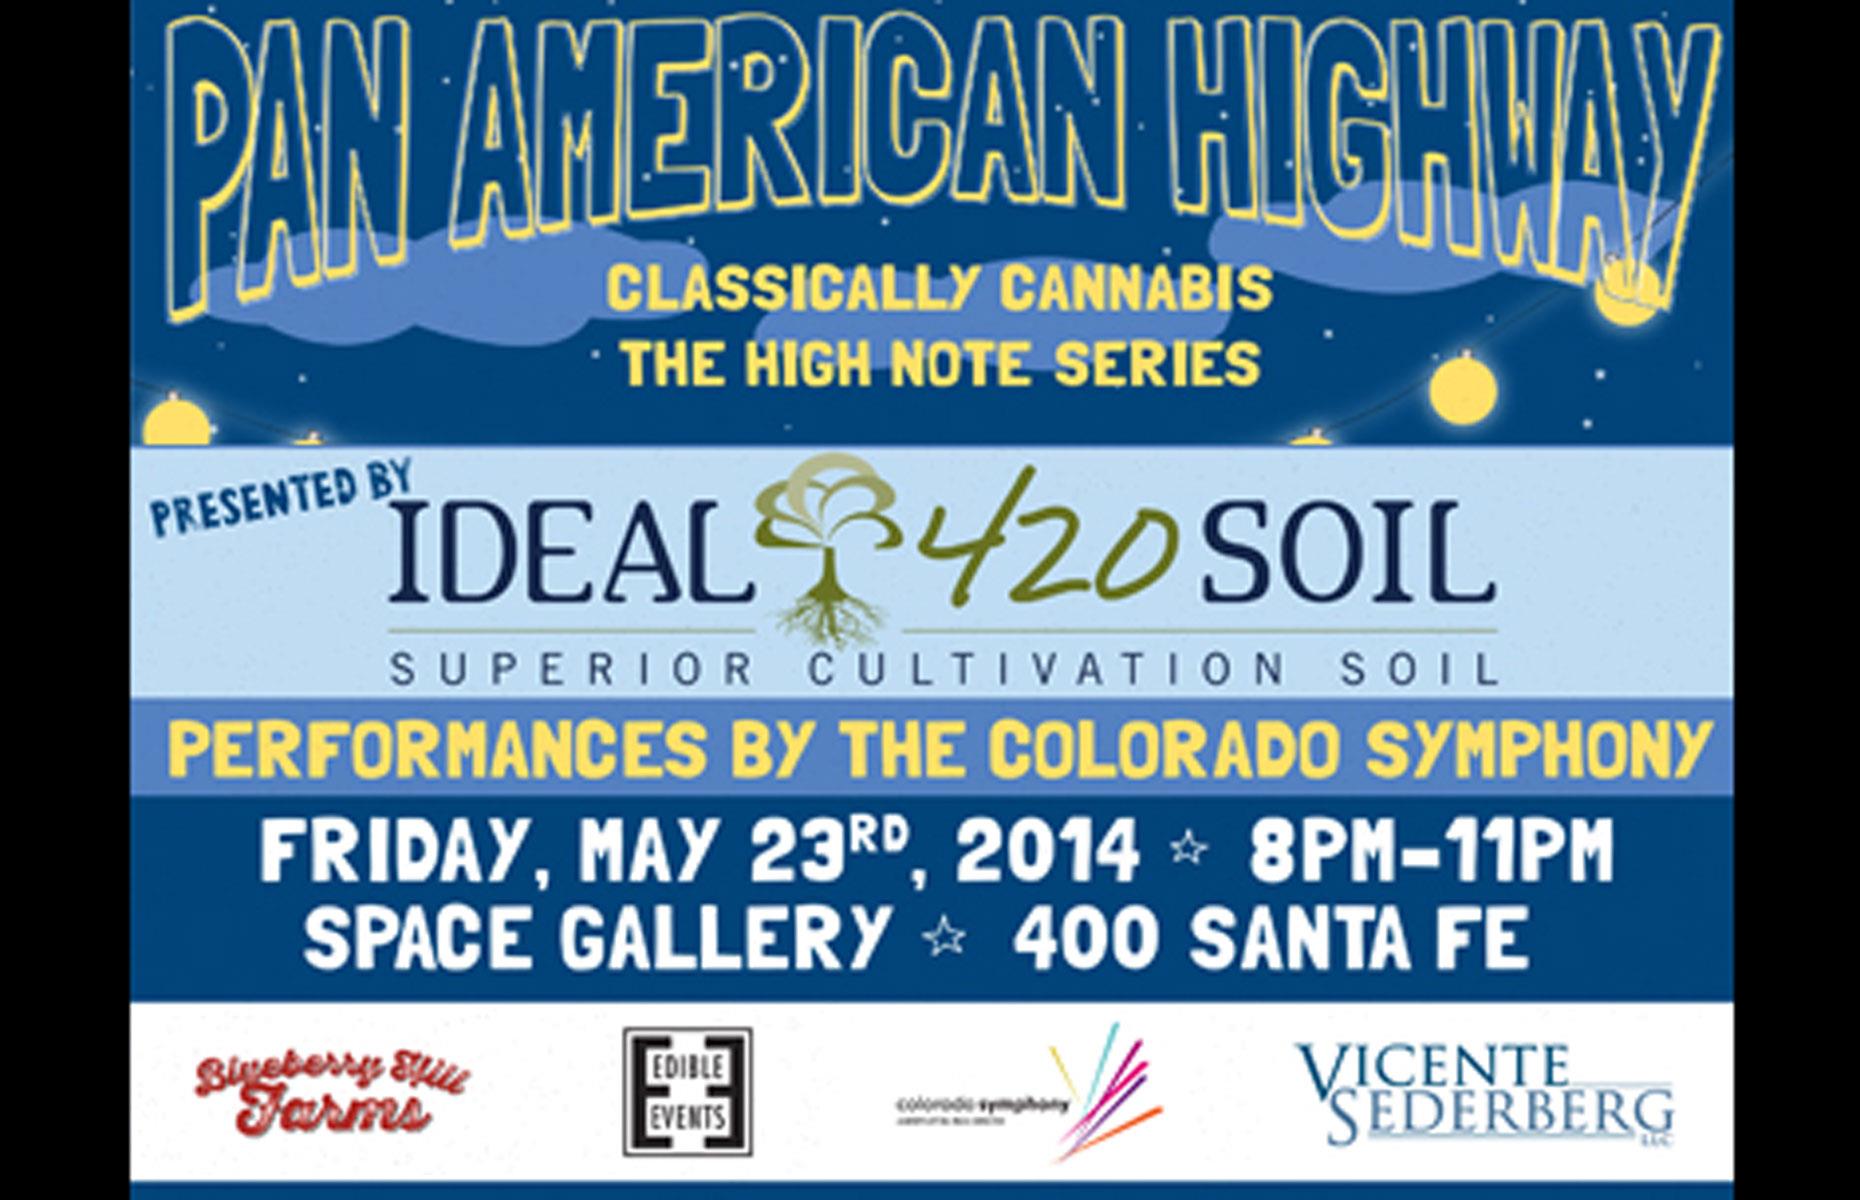 Cannabis classical music concerts: $15,000